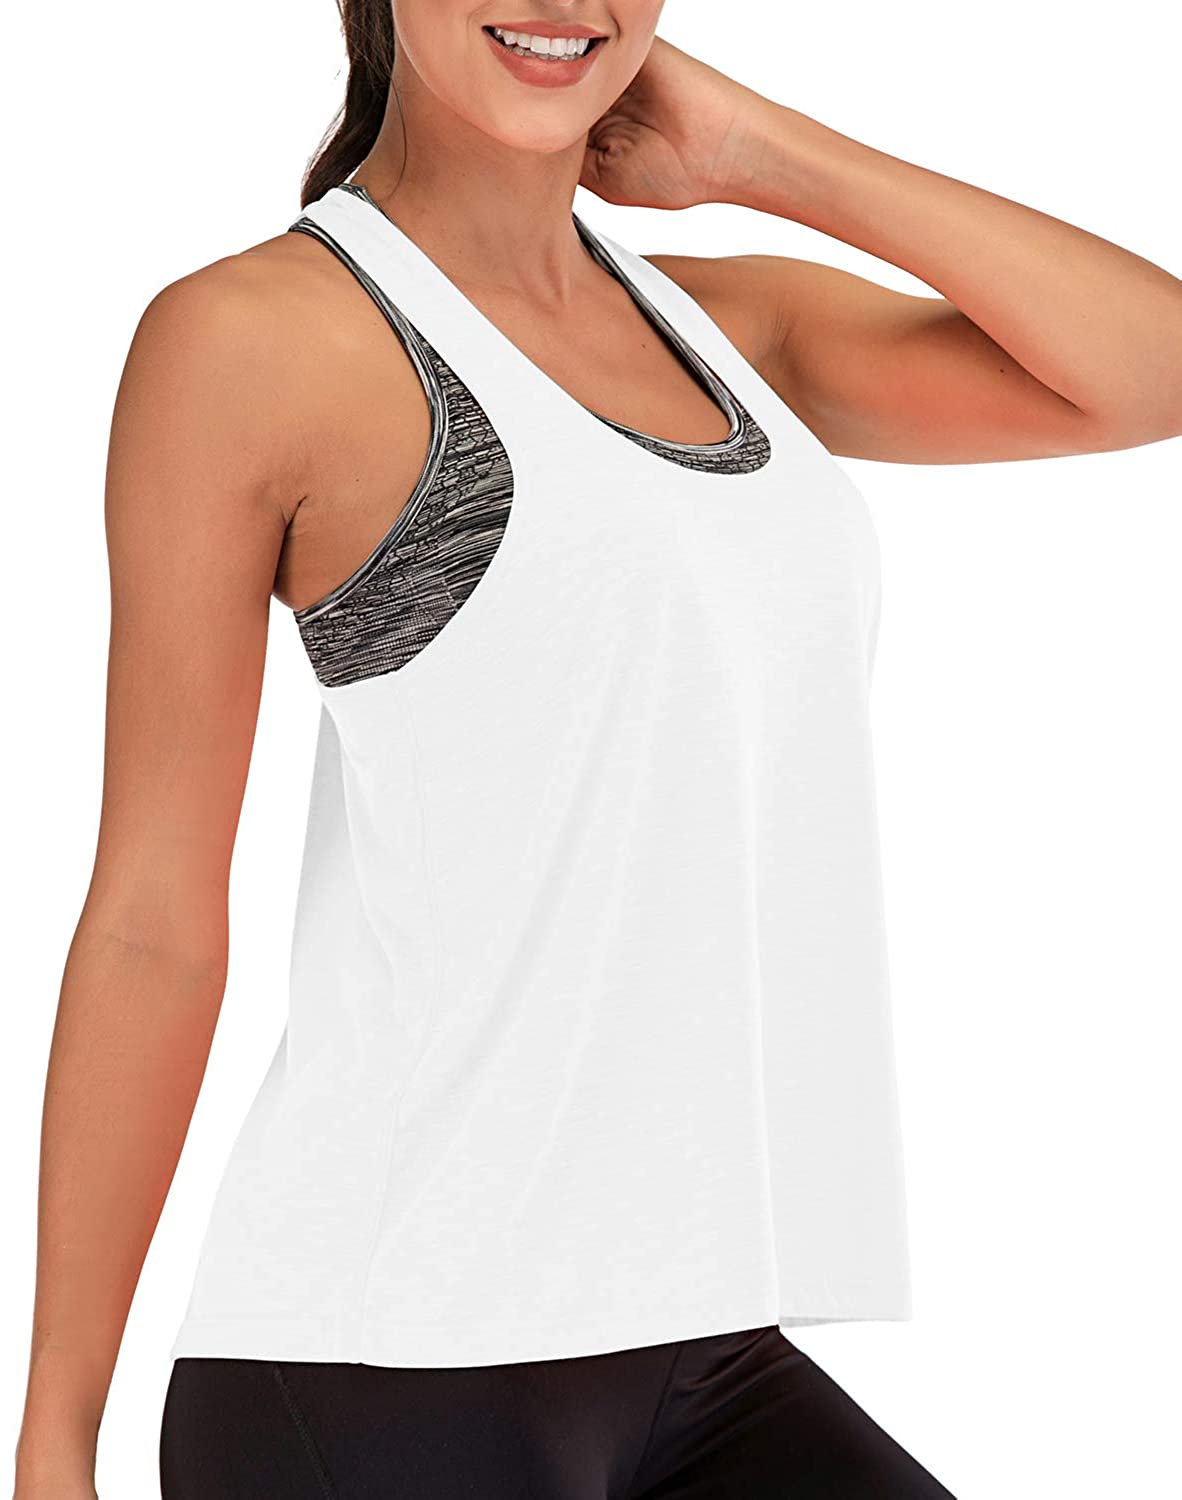 FAFAIR Workout Tank Tops for Women with Built in Bra Tanks, White, Size ...